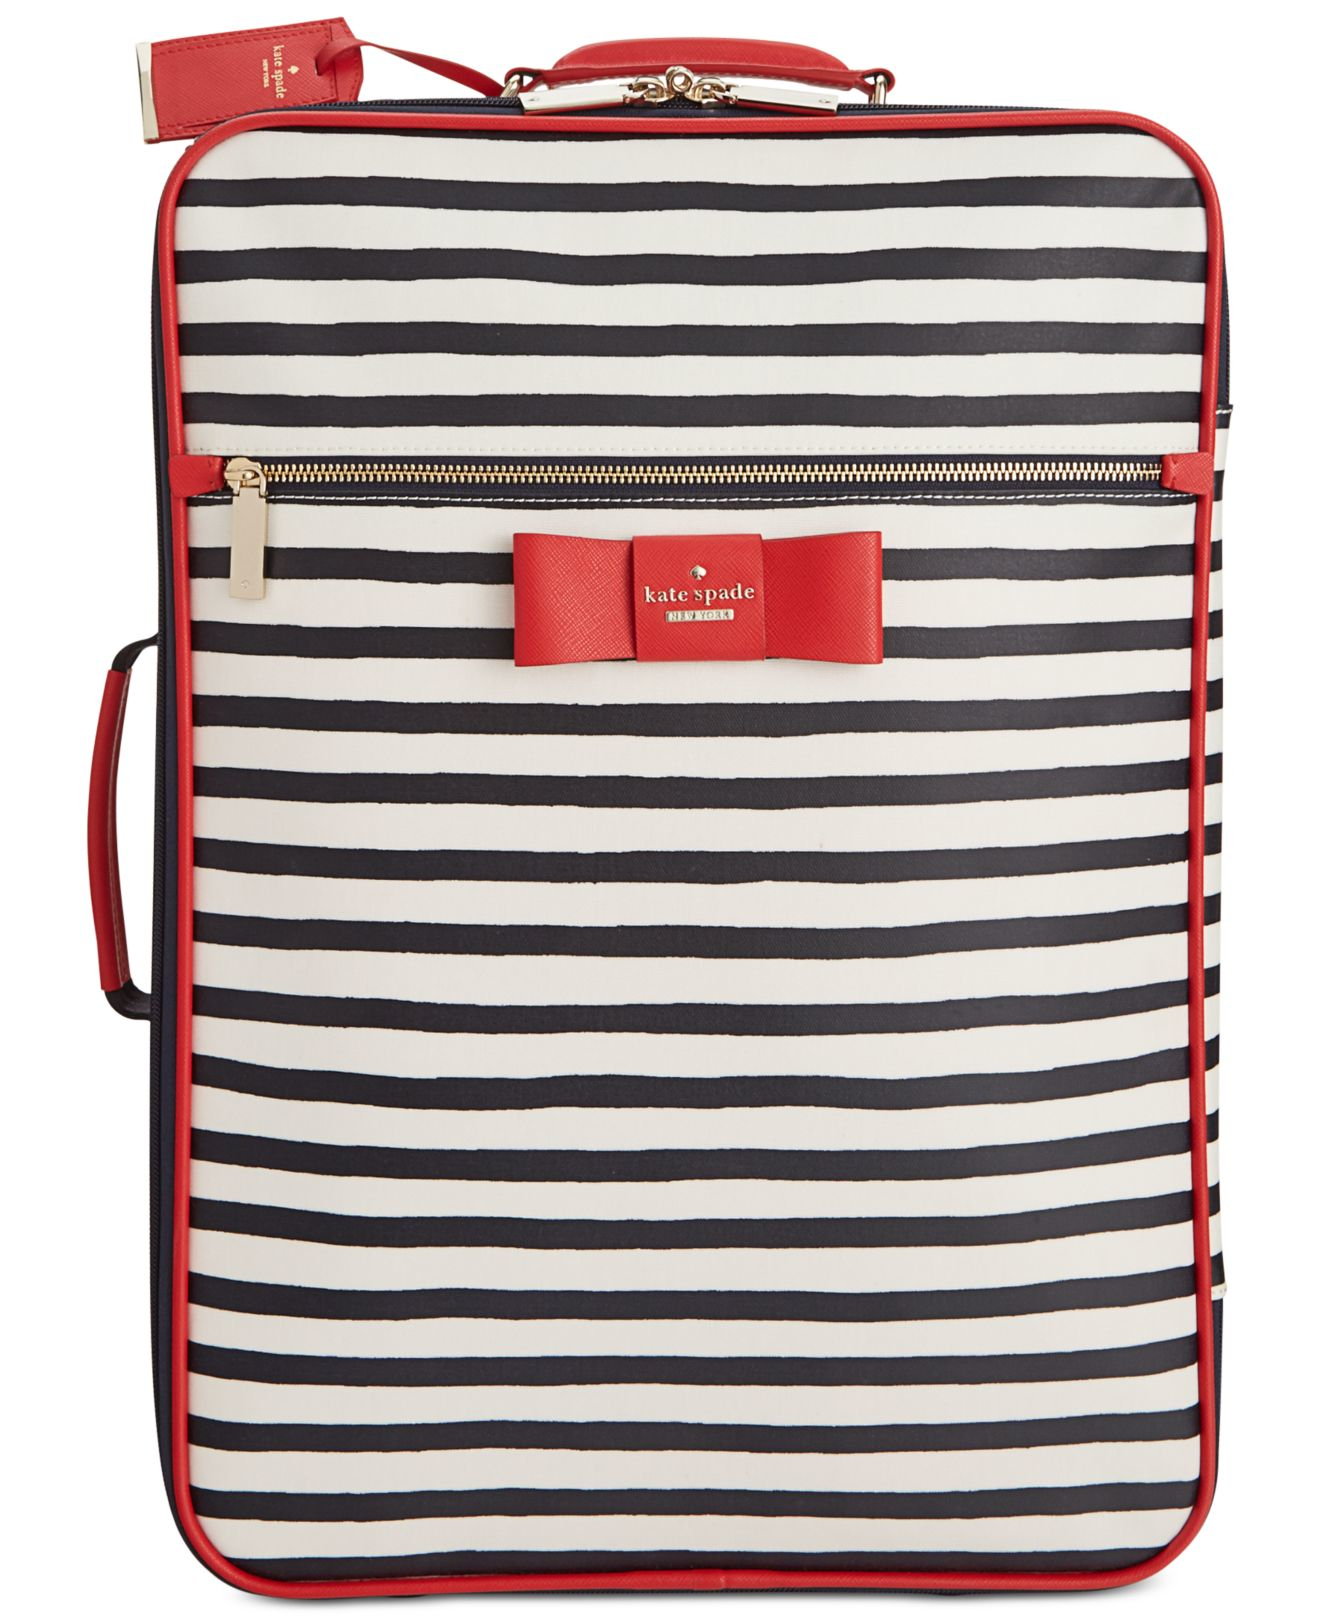 kate spade, Bags, Kate Spade Rolling Carry On Bag